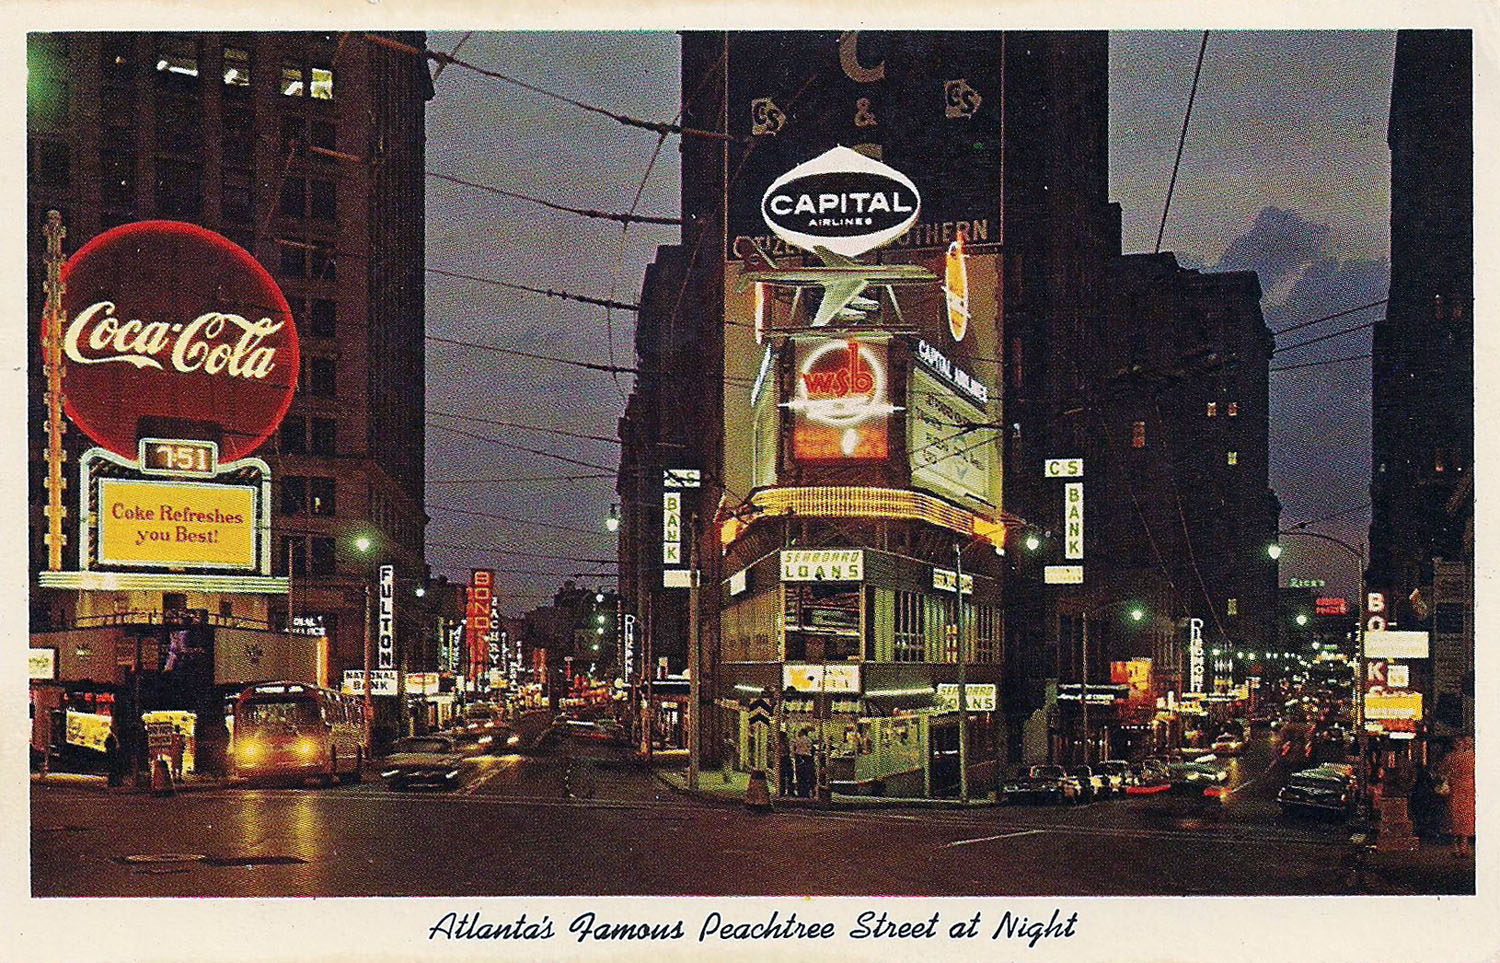 Peachtree Street at Margaret Mitchell Square, 1960